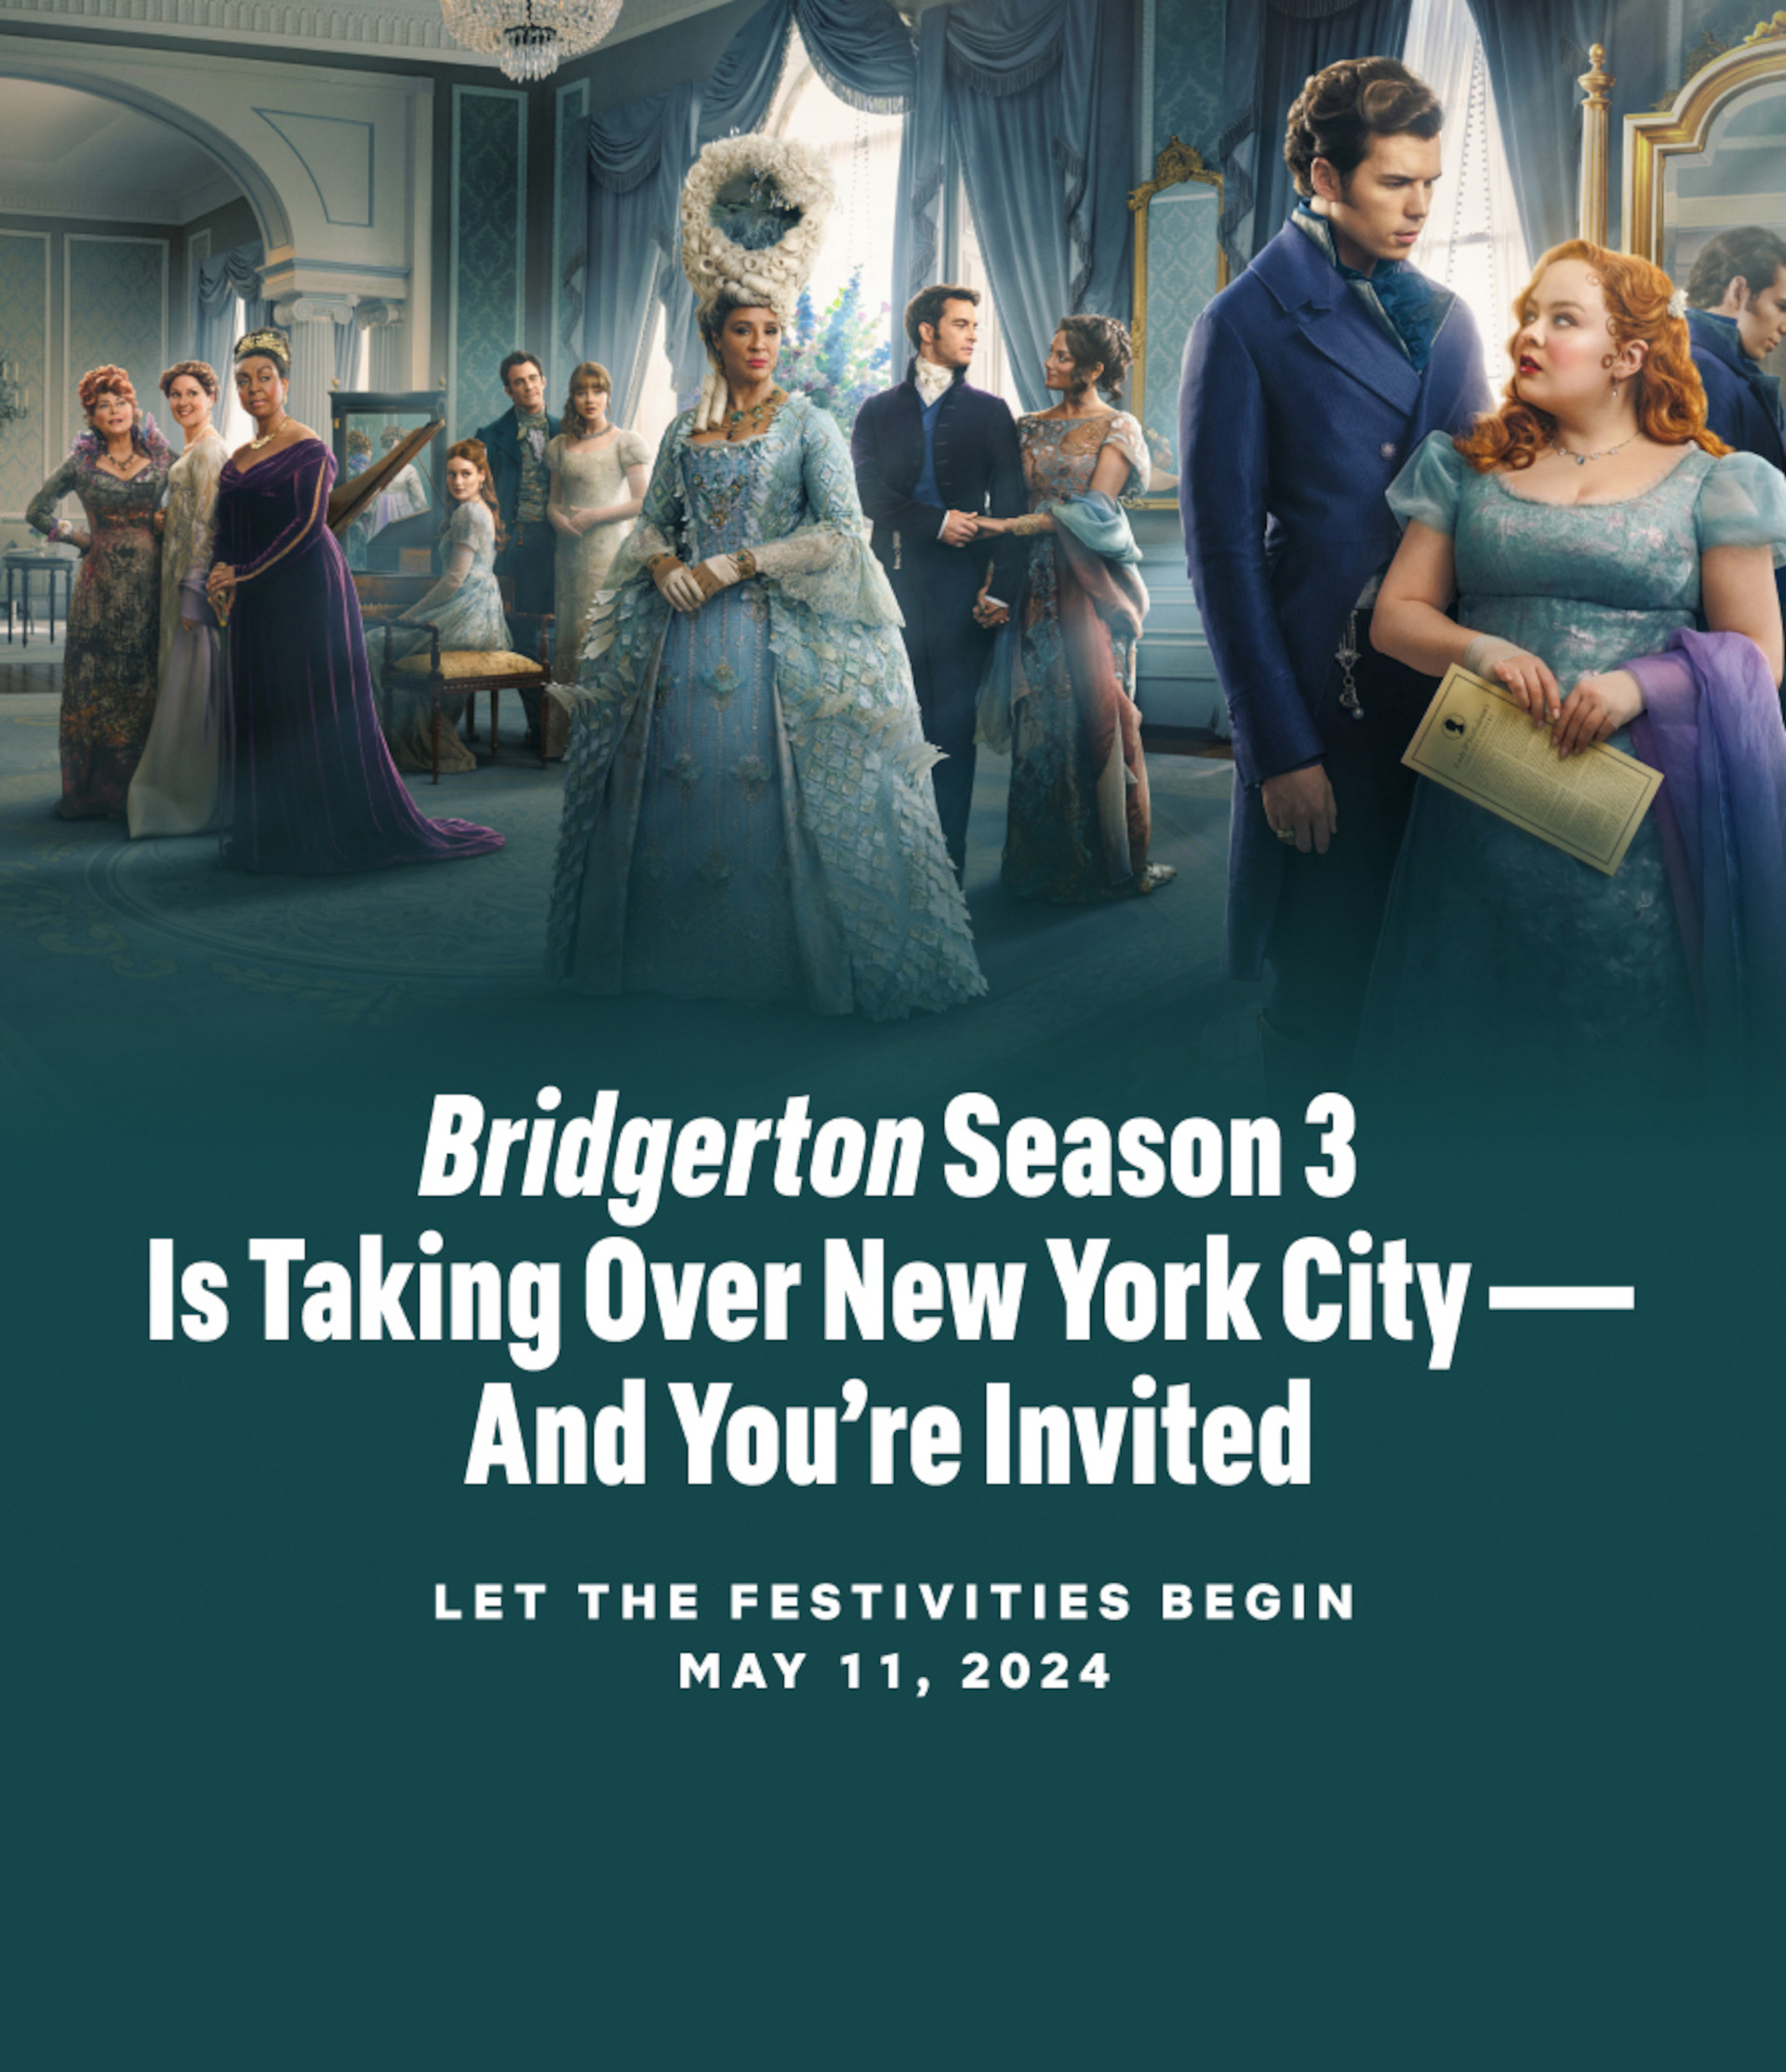 Bridgerton New York Event Banner ' Bridgerton Season 3 is taking over New York City and You're invited' 'Let the festivities begin may 11, 2024' 